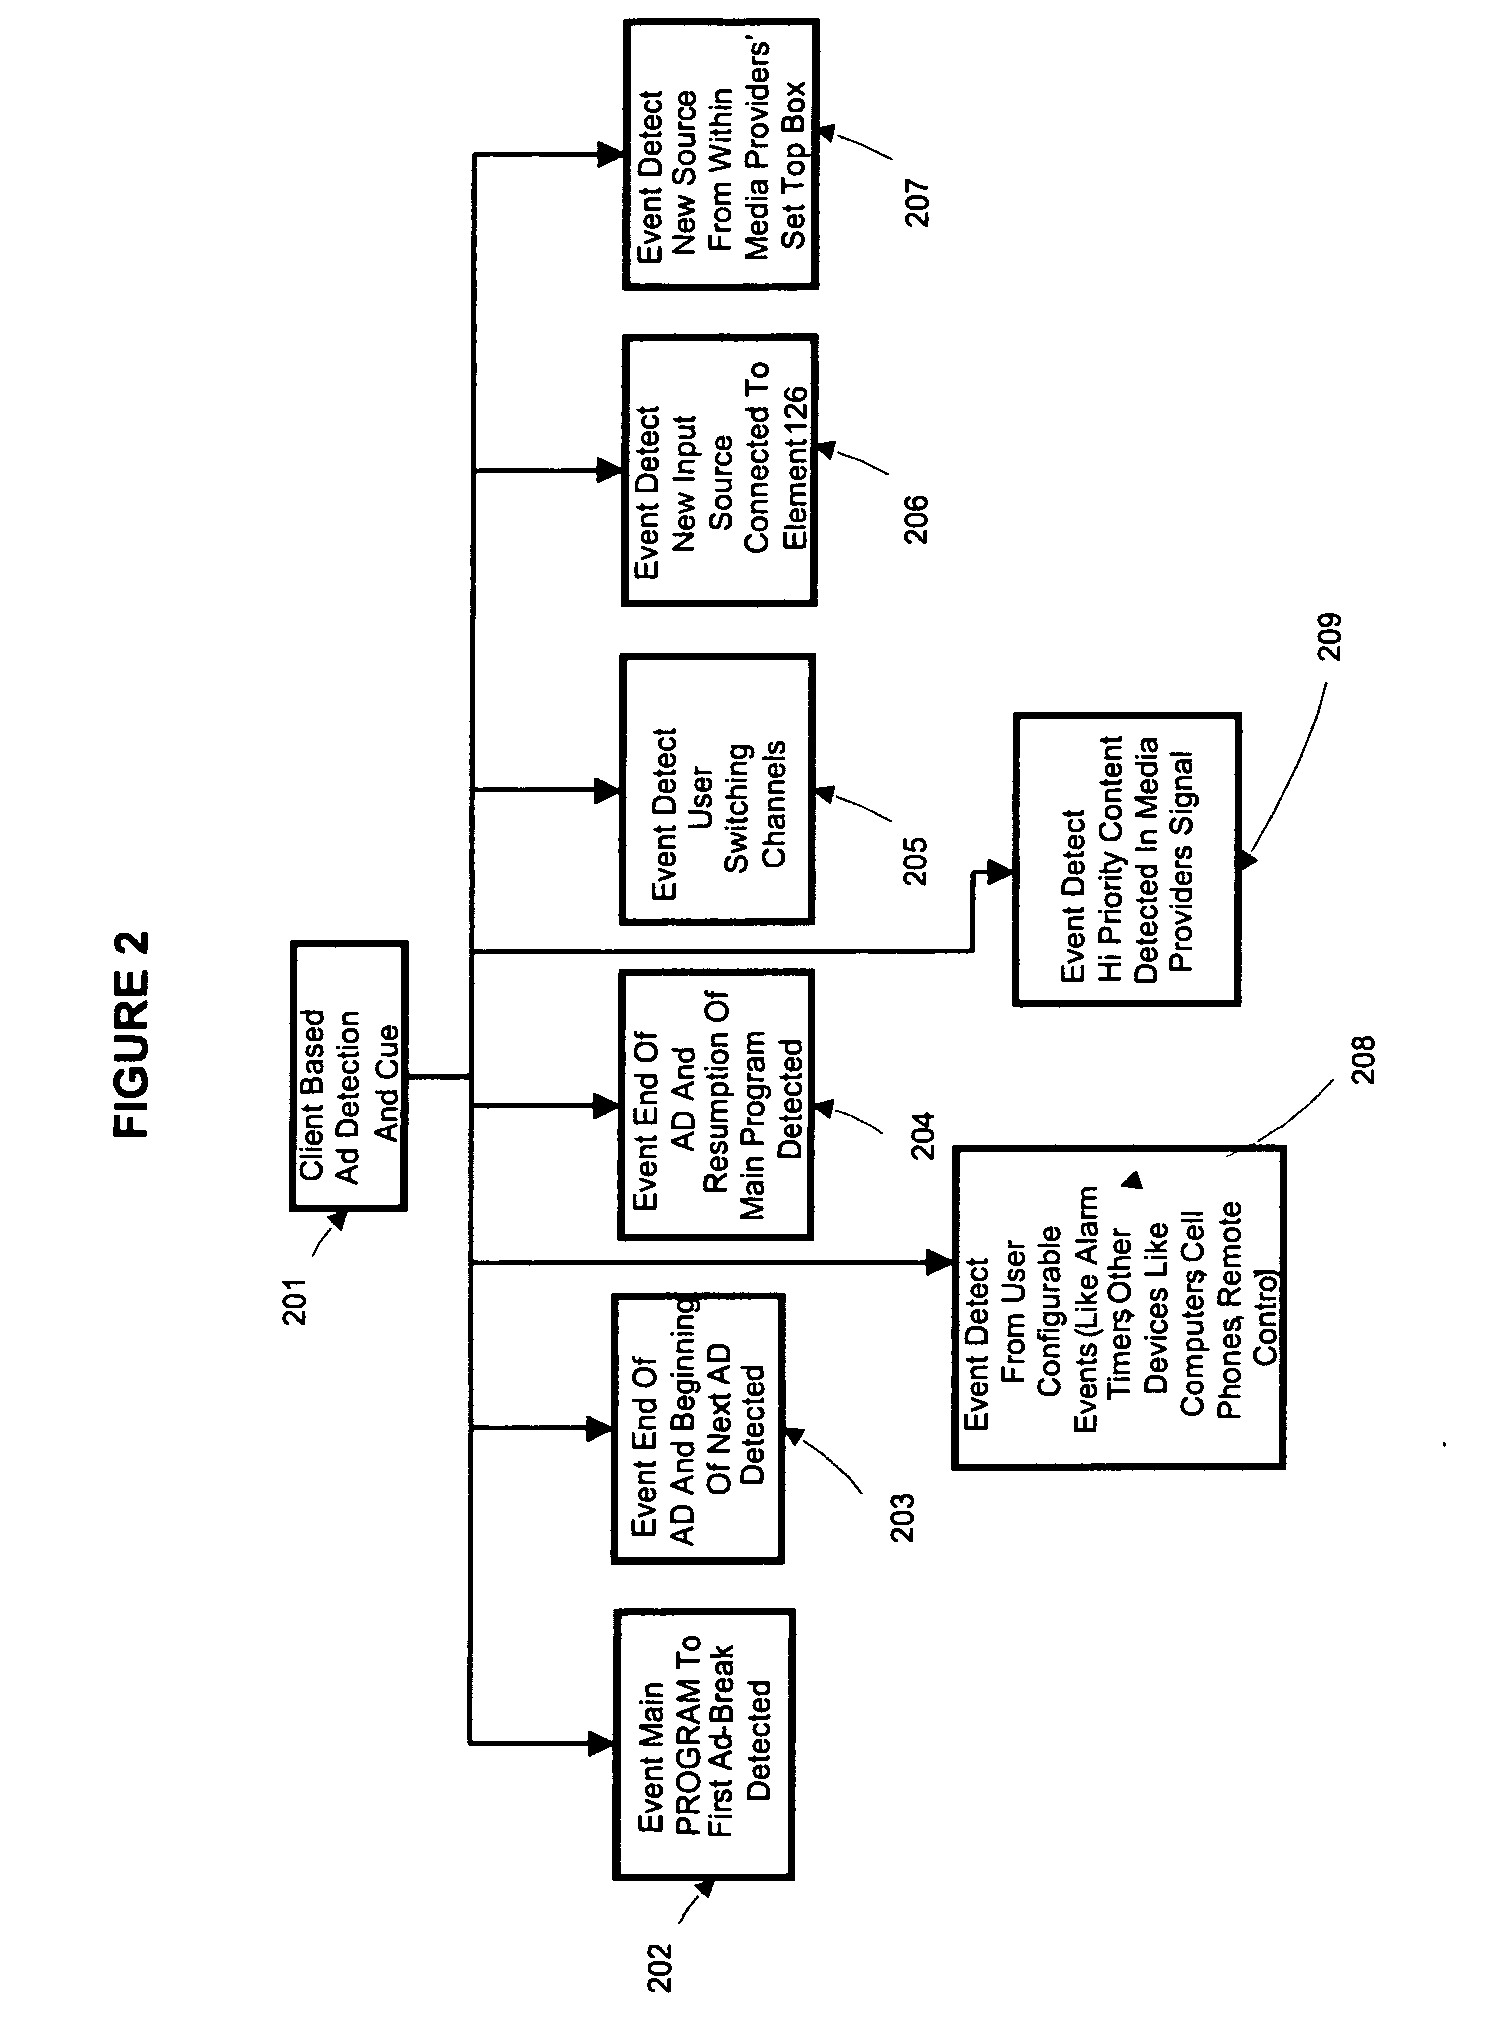 System and methods for switching between two or more media streams